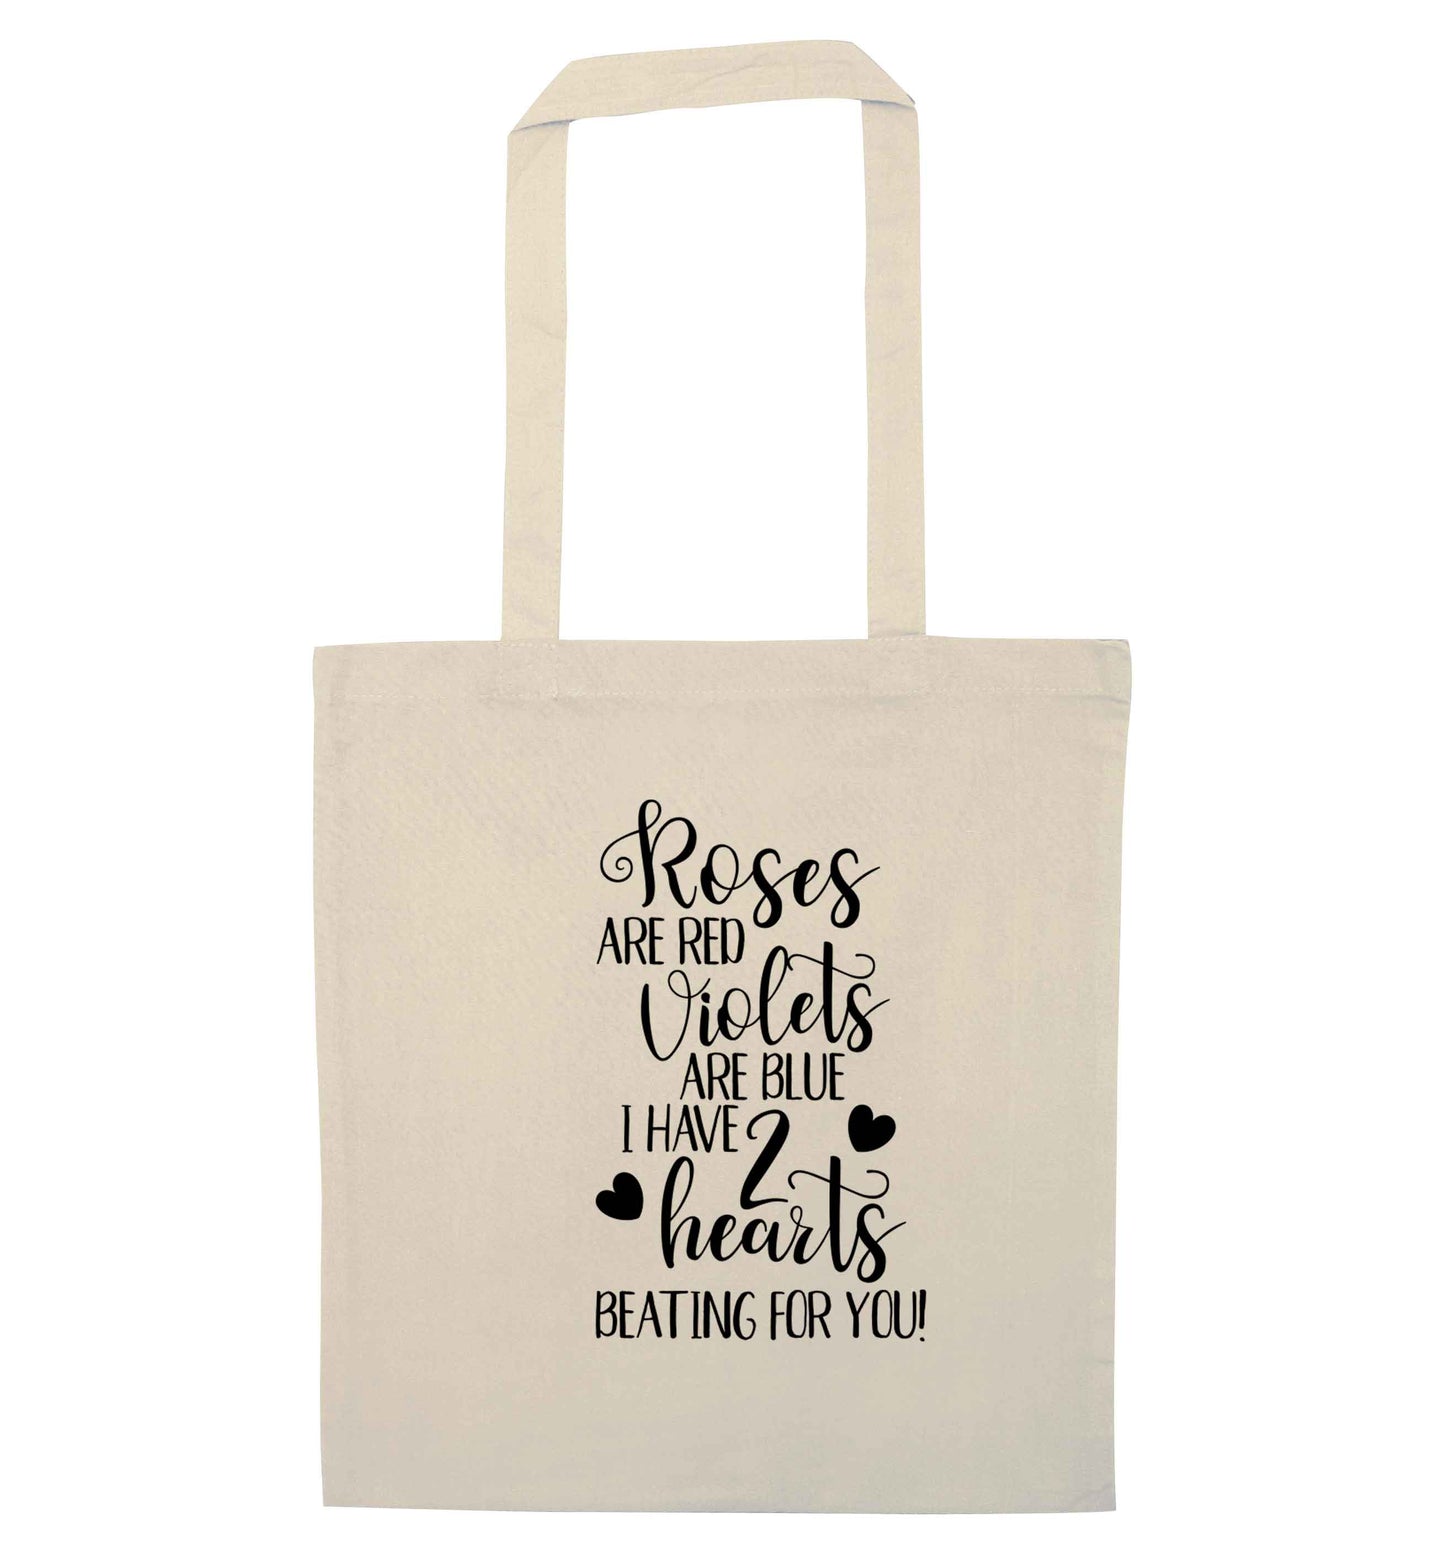 Roses are red violets are blue I have two hearts beating for you natural tote bag